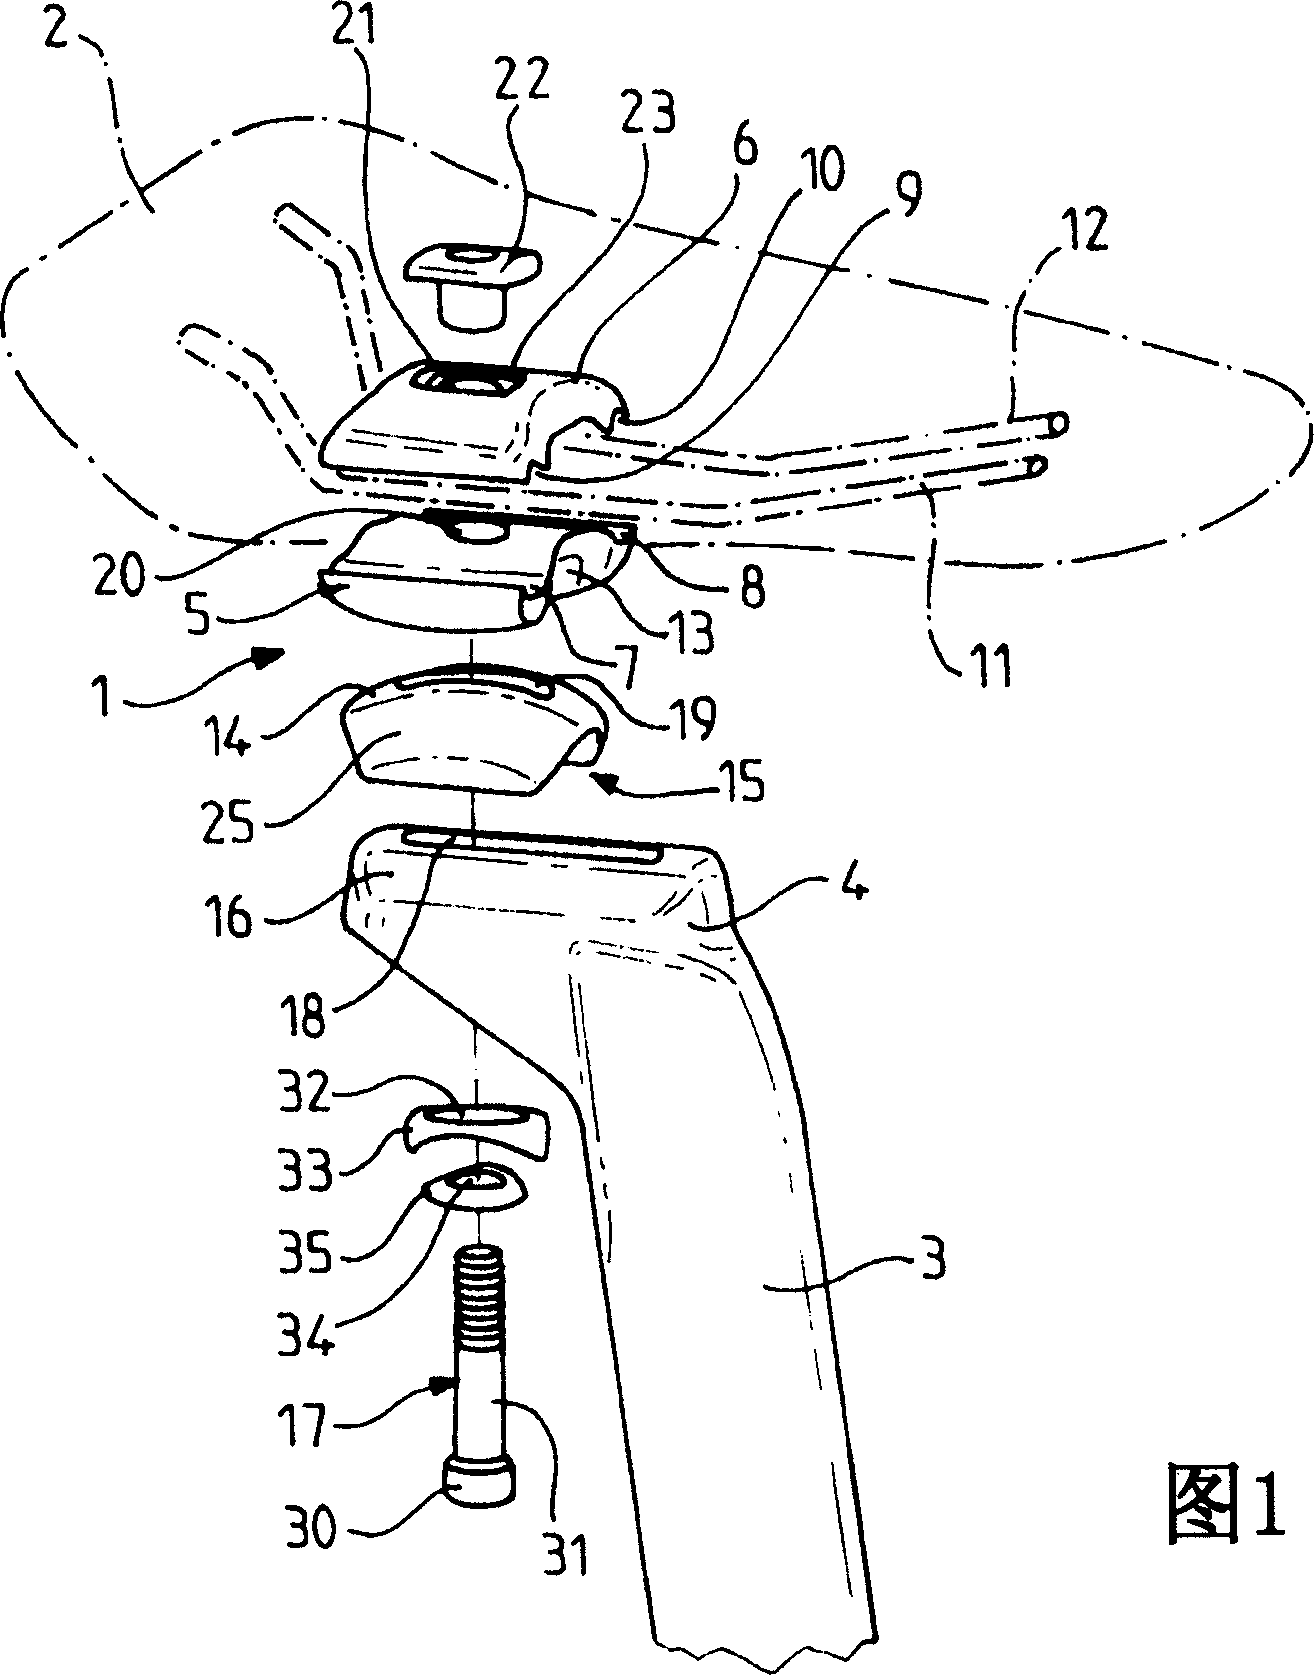 Fixation device of a saddle on the head of the saddle pin.